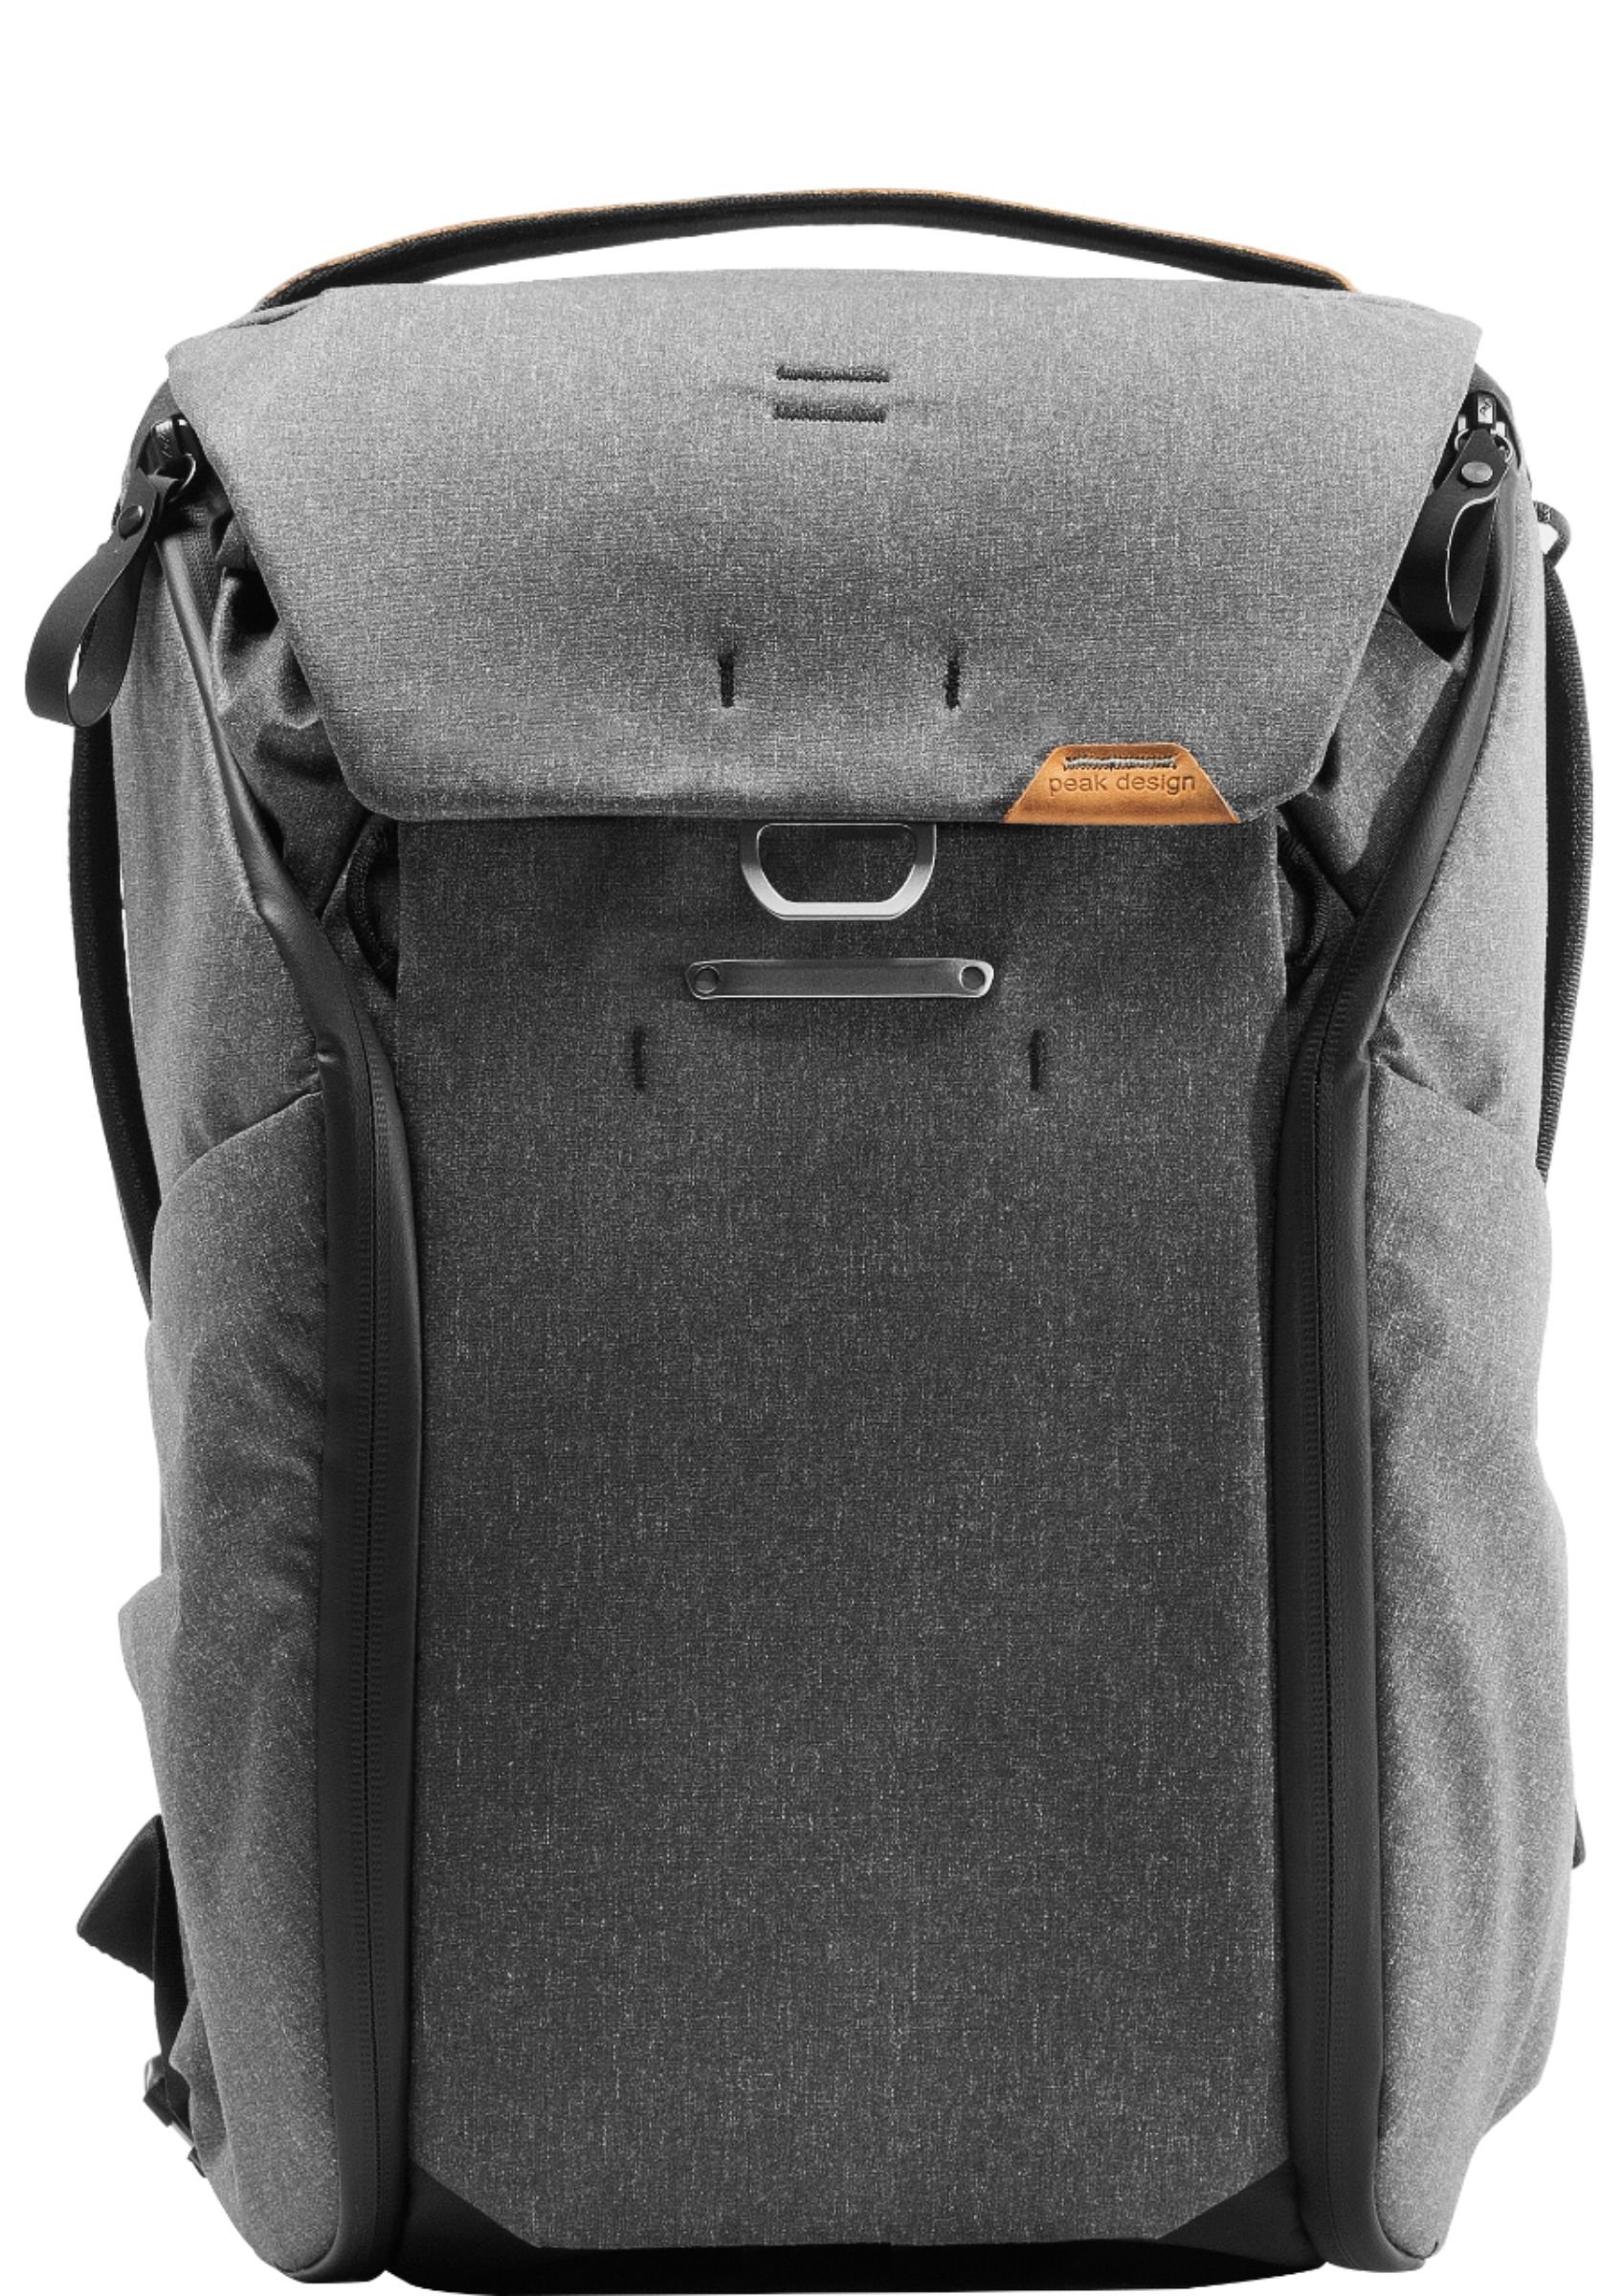 Angle View: Peak Design - Everyday Backpack V2 20L - Charcoal